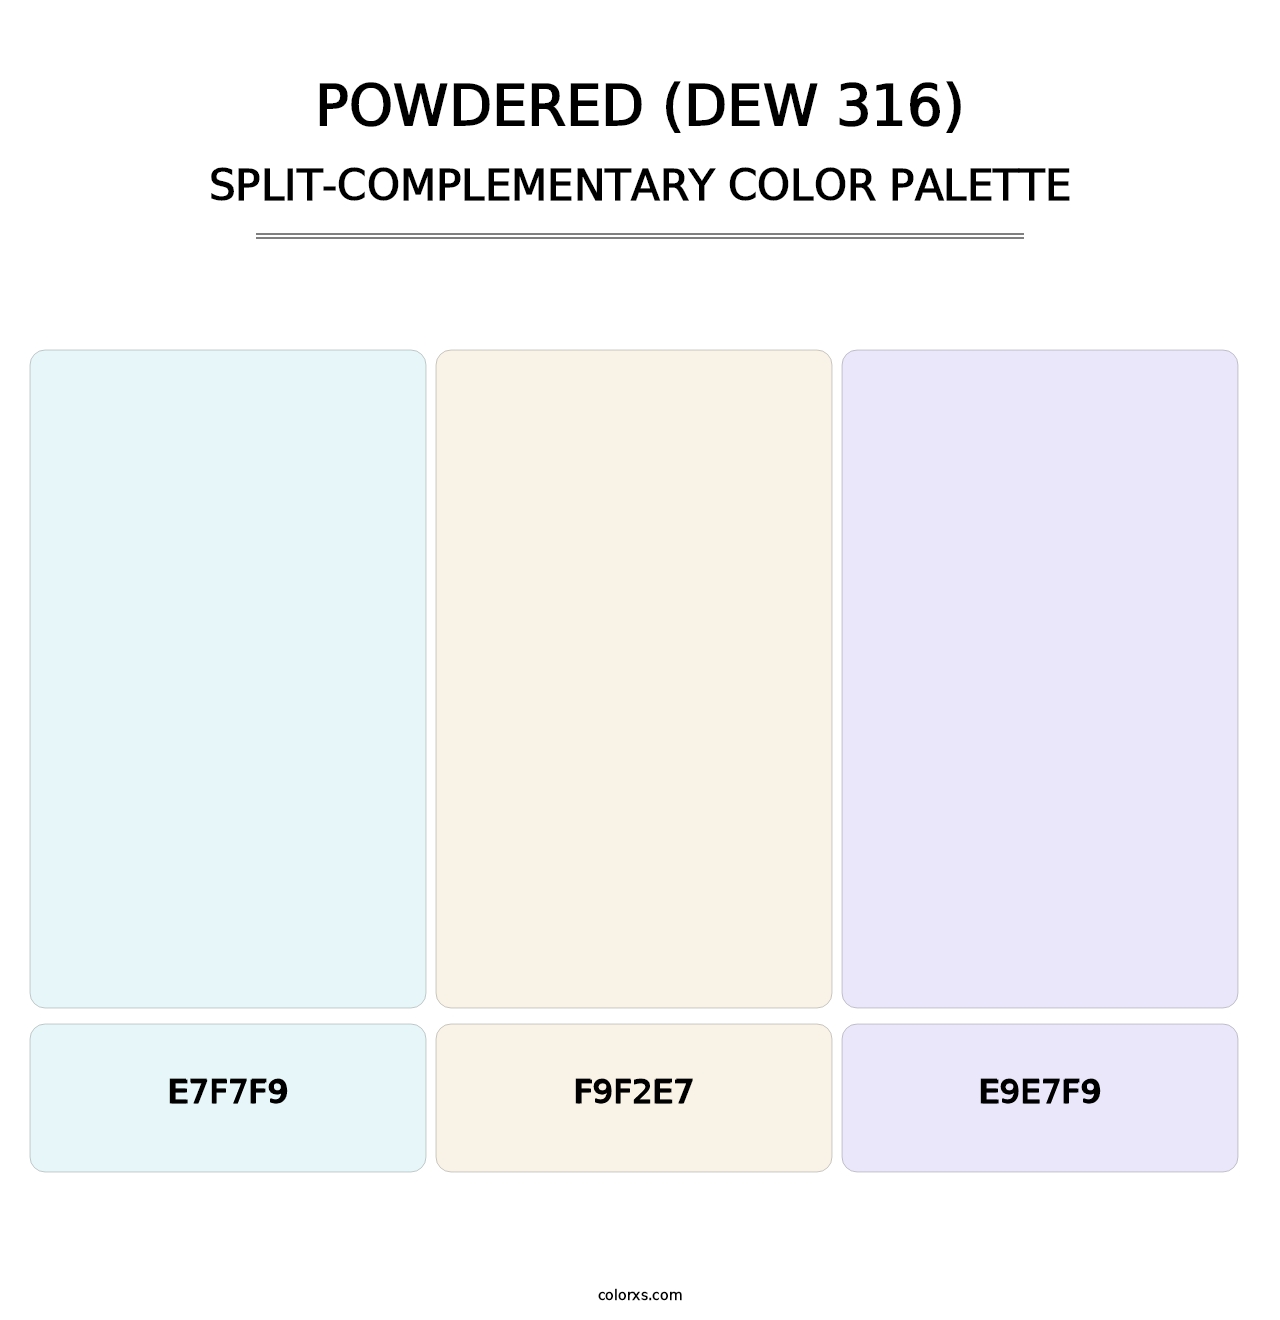 Powdered (DEW 316) - Split-Complementary Color Palette